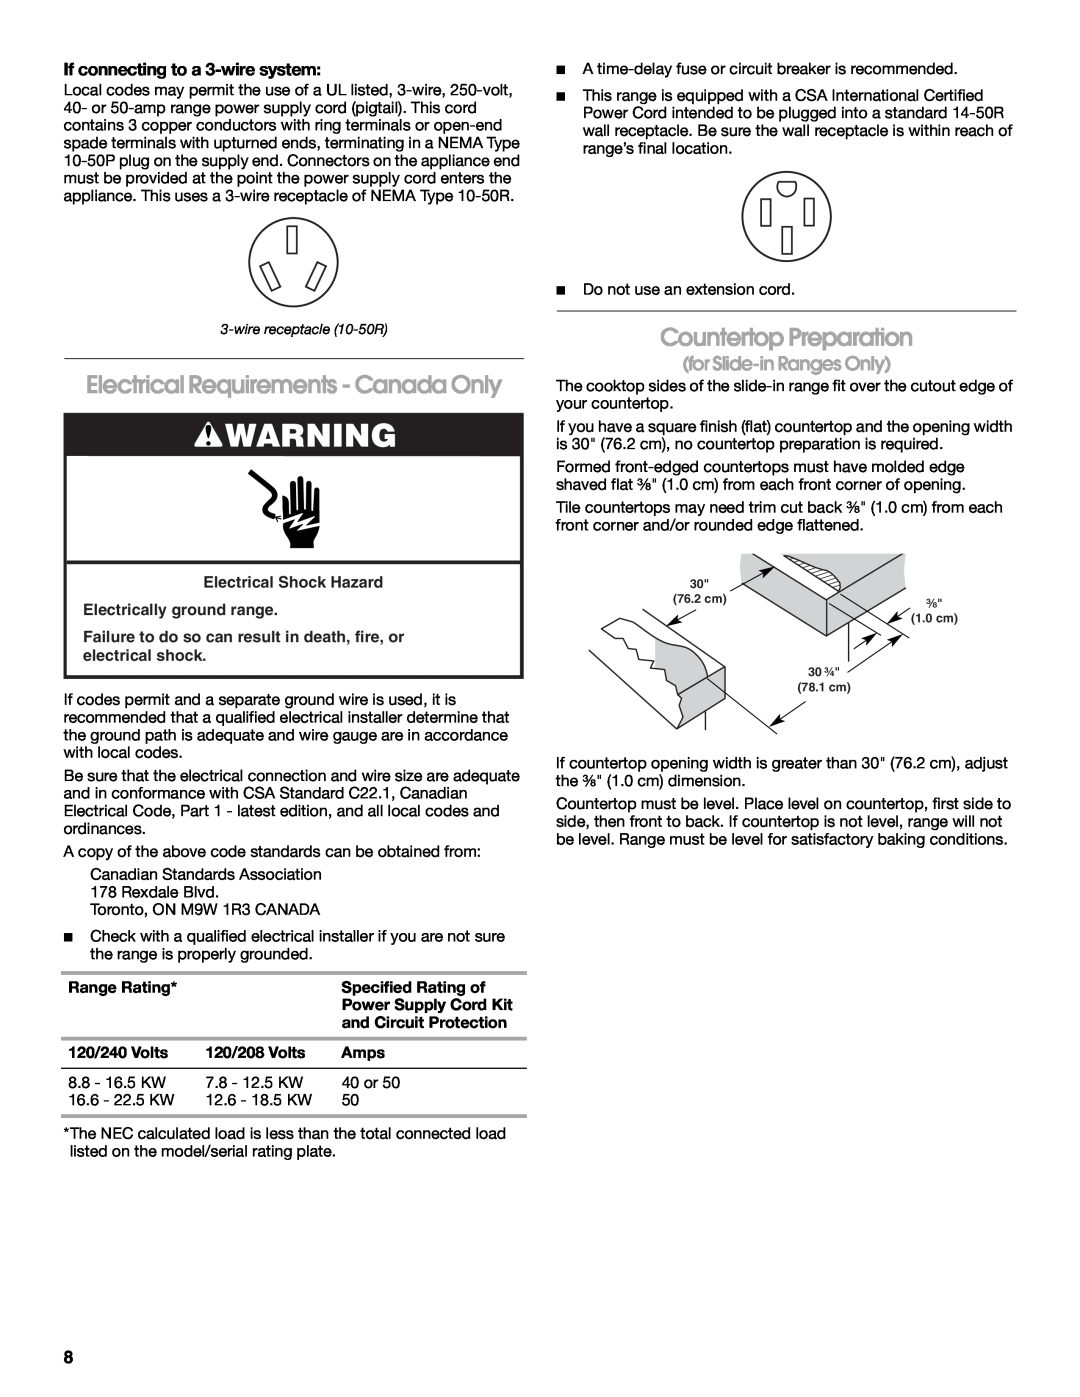 Jenn-Air W10430955A Electrical Requirements - Canada Only, Countertop Preparation, for Slide-inRanges Only 